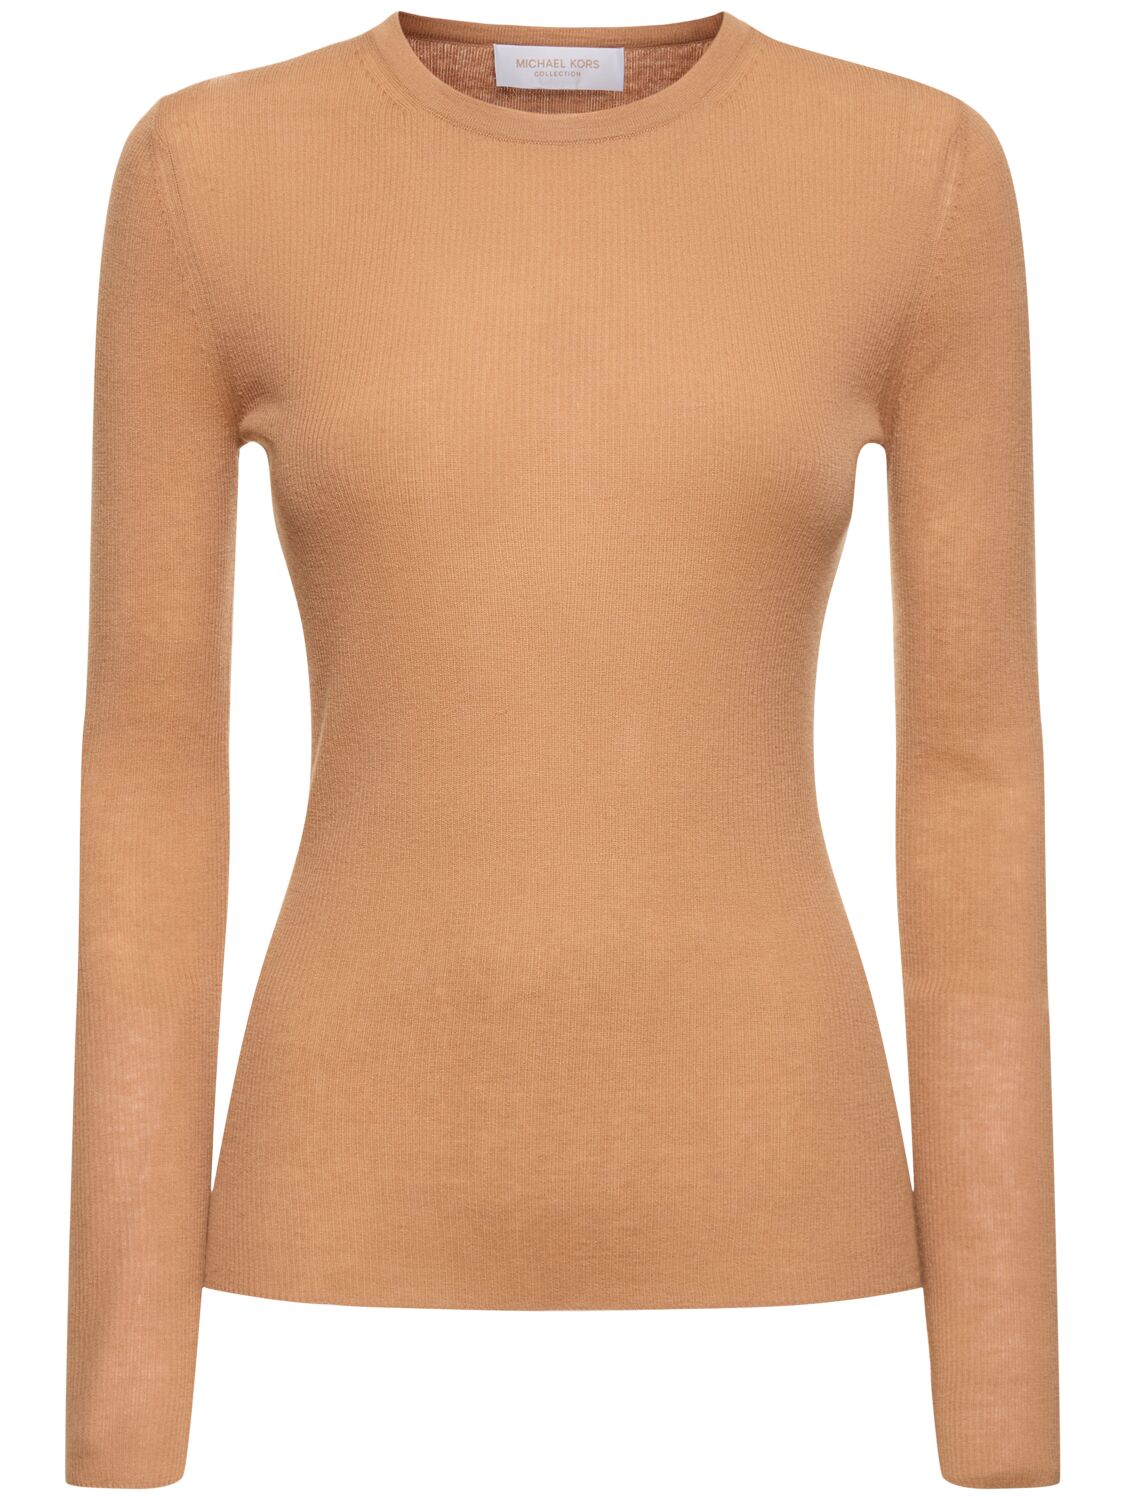 Image of Hutton Cashmere Boatneck Sweater